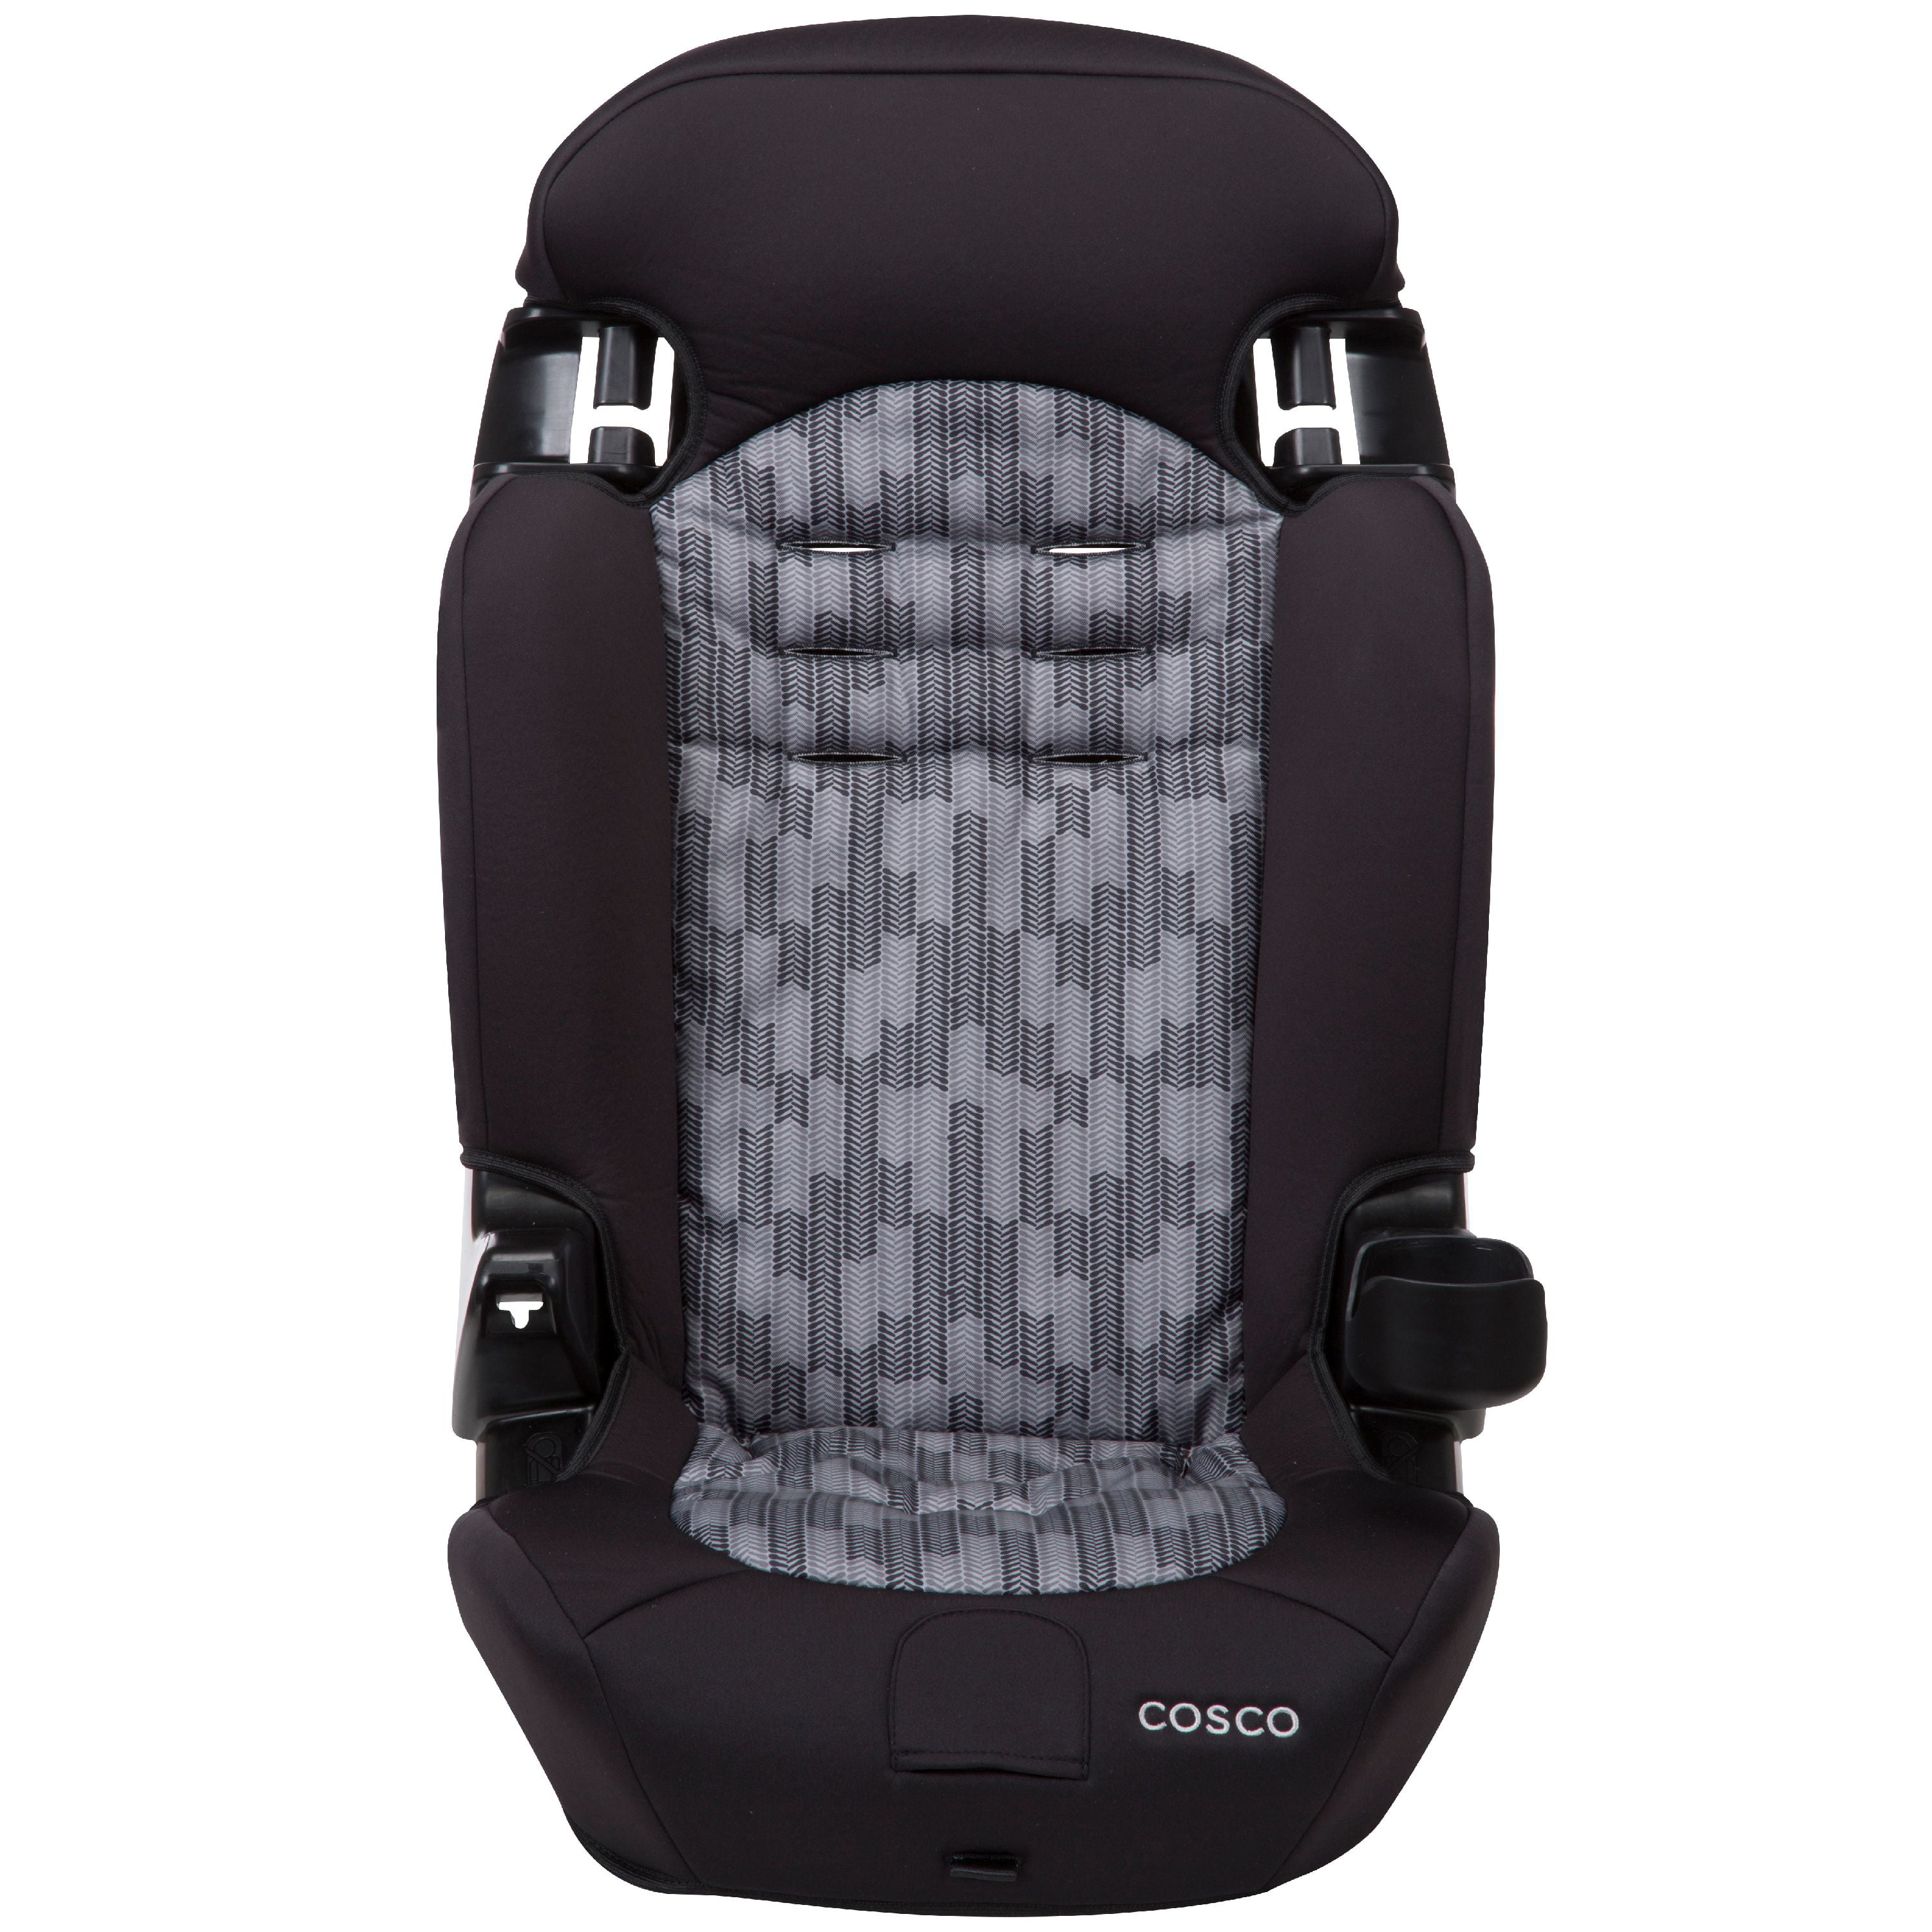 Cosco Finale 2-in-1 Comfortable Booster Car Seat for Kids and Children